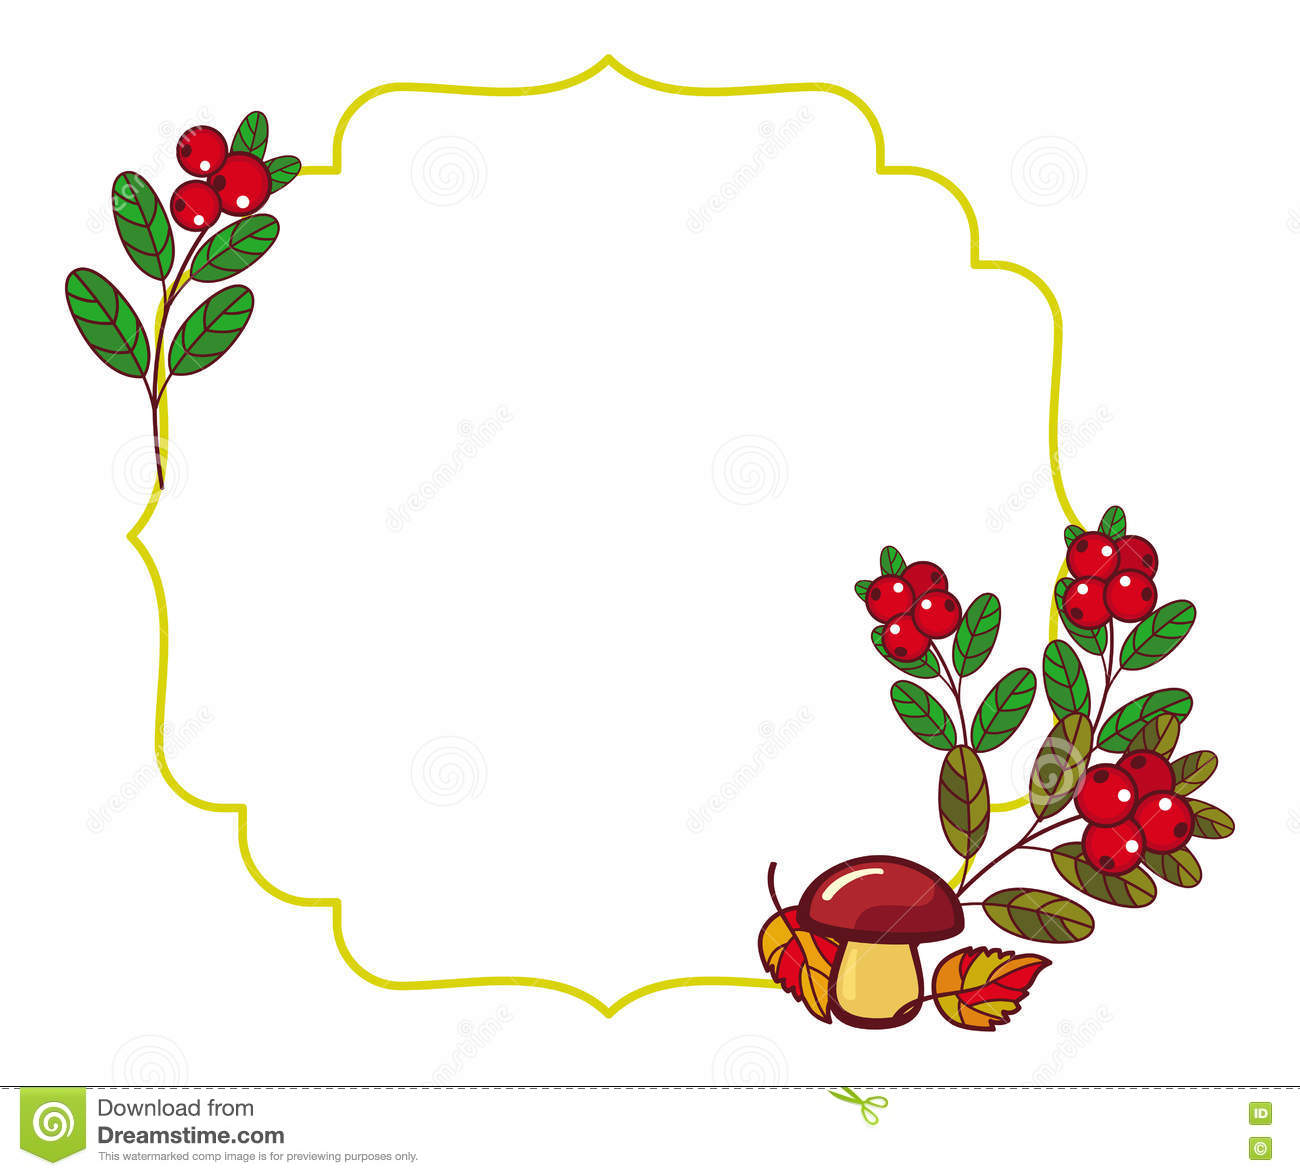 Color Frame With Mushrooms And Cranberries. Stock Illustration.